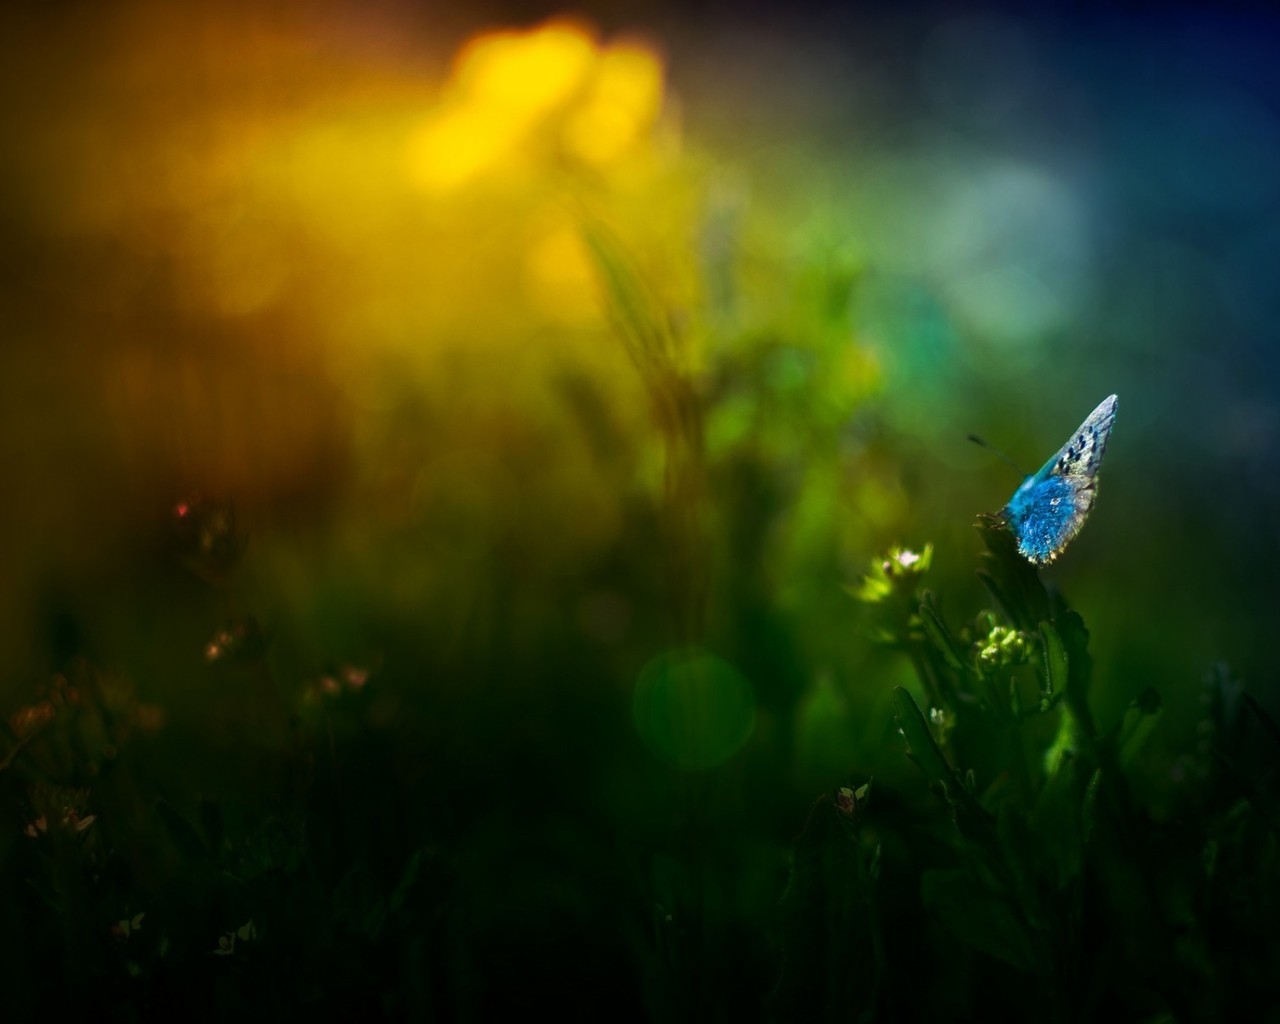 Blue Butterfly on Grass for 1280 x 1024 resolution